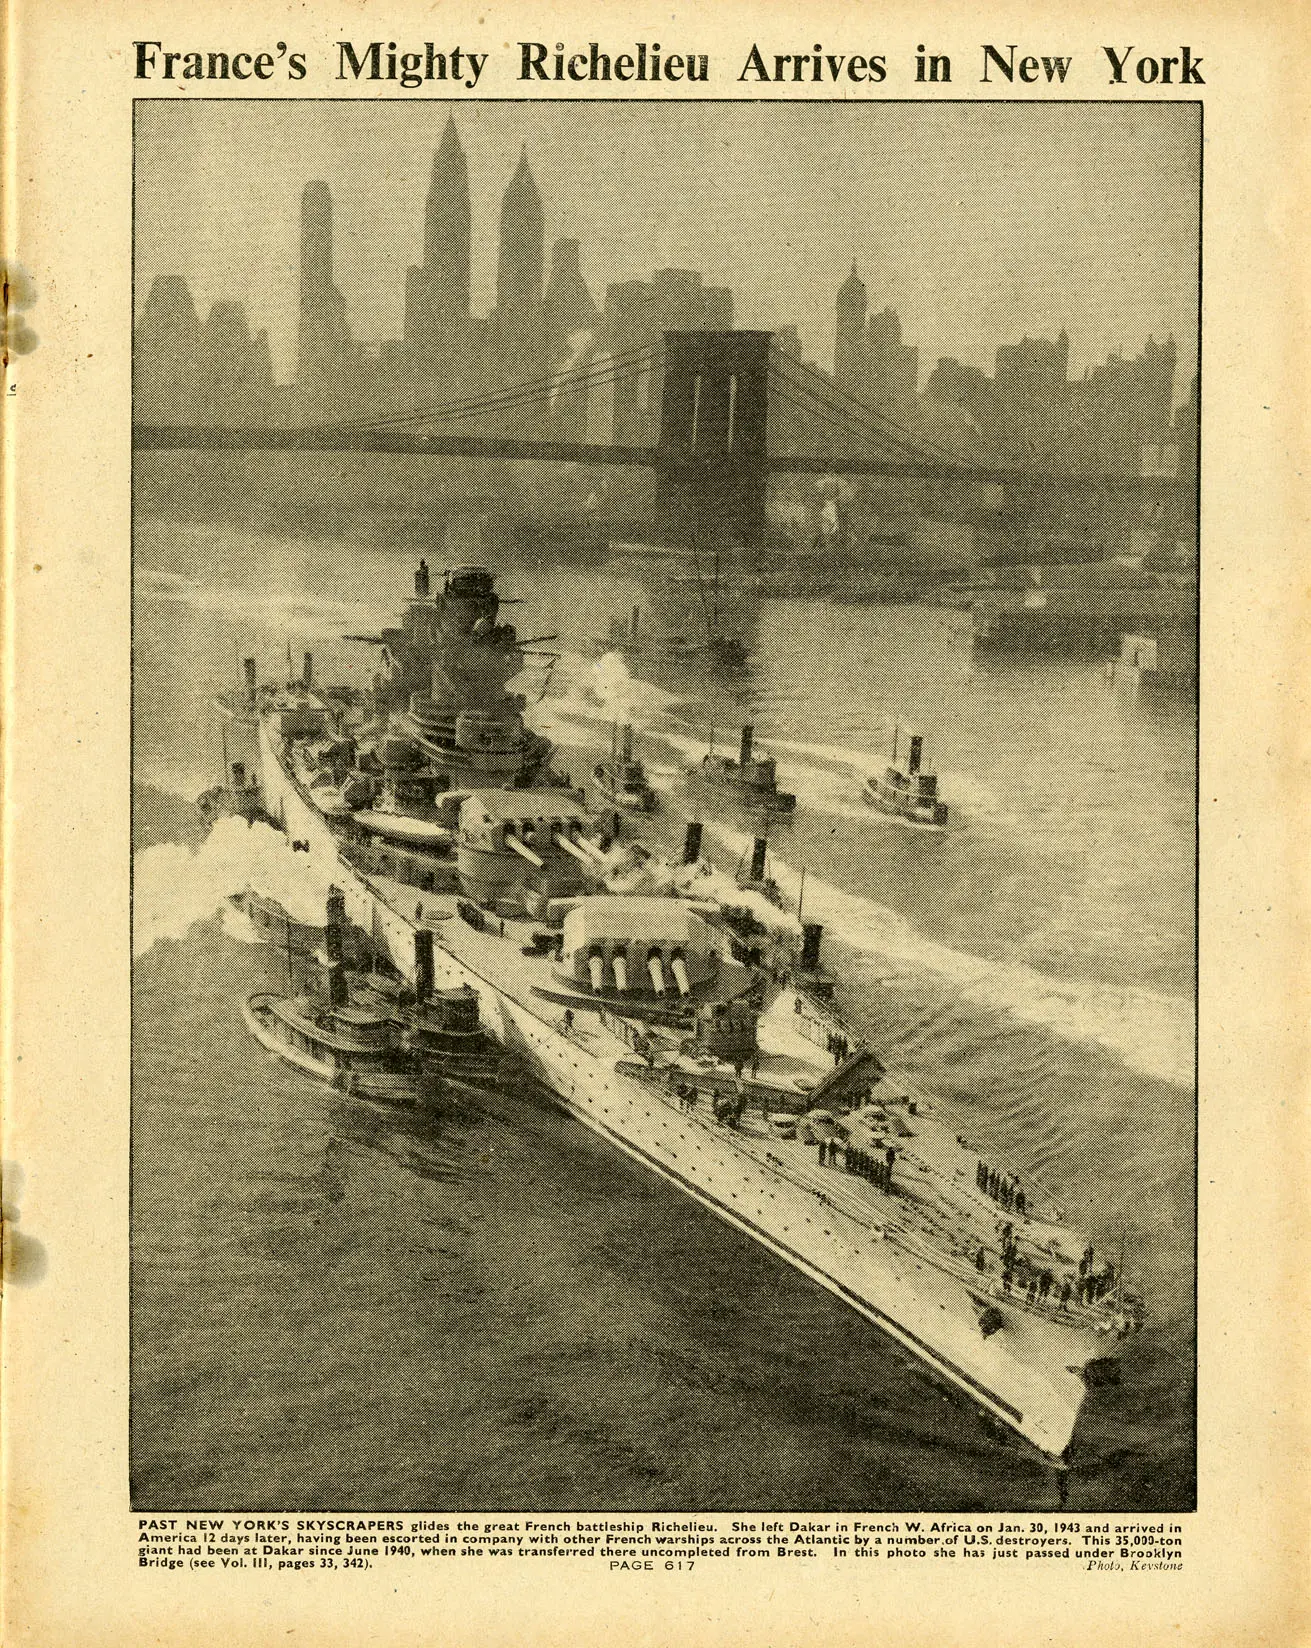 A page of The War Illustrated showing the French battleship Richelieu being towed through New York. The New York skyline is prominent in the background, as well as the Brooklyn Bridge.